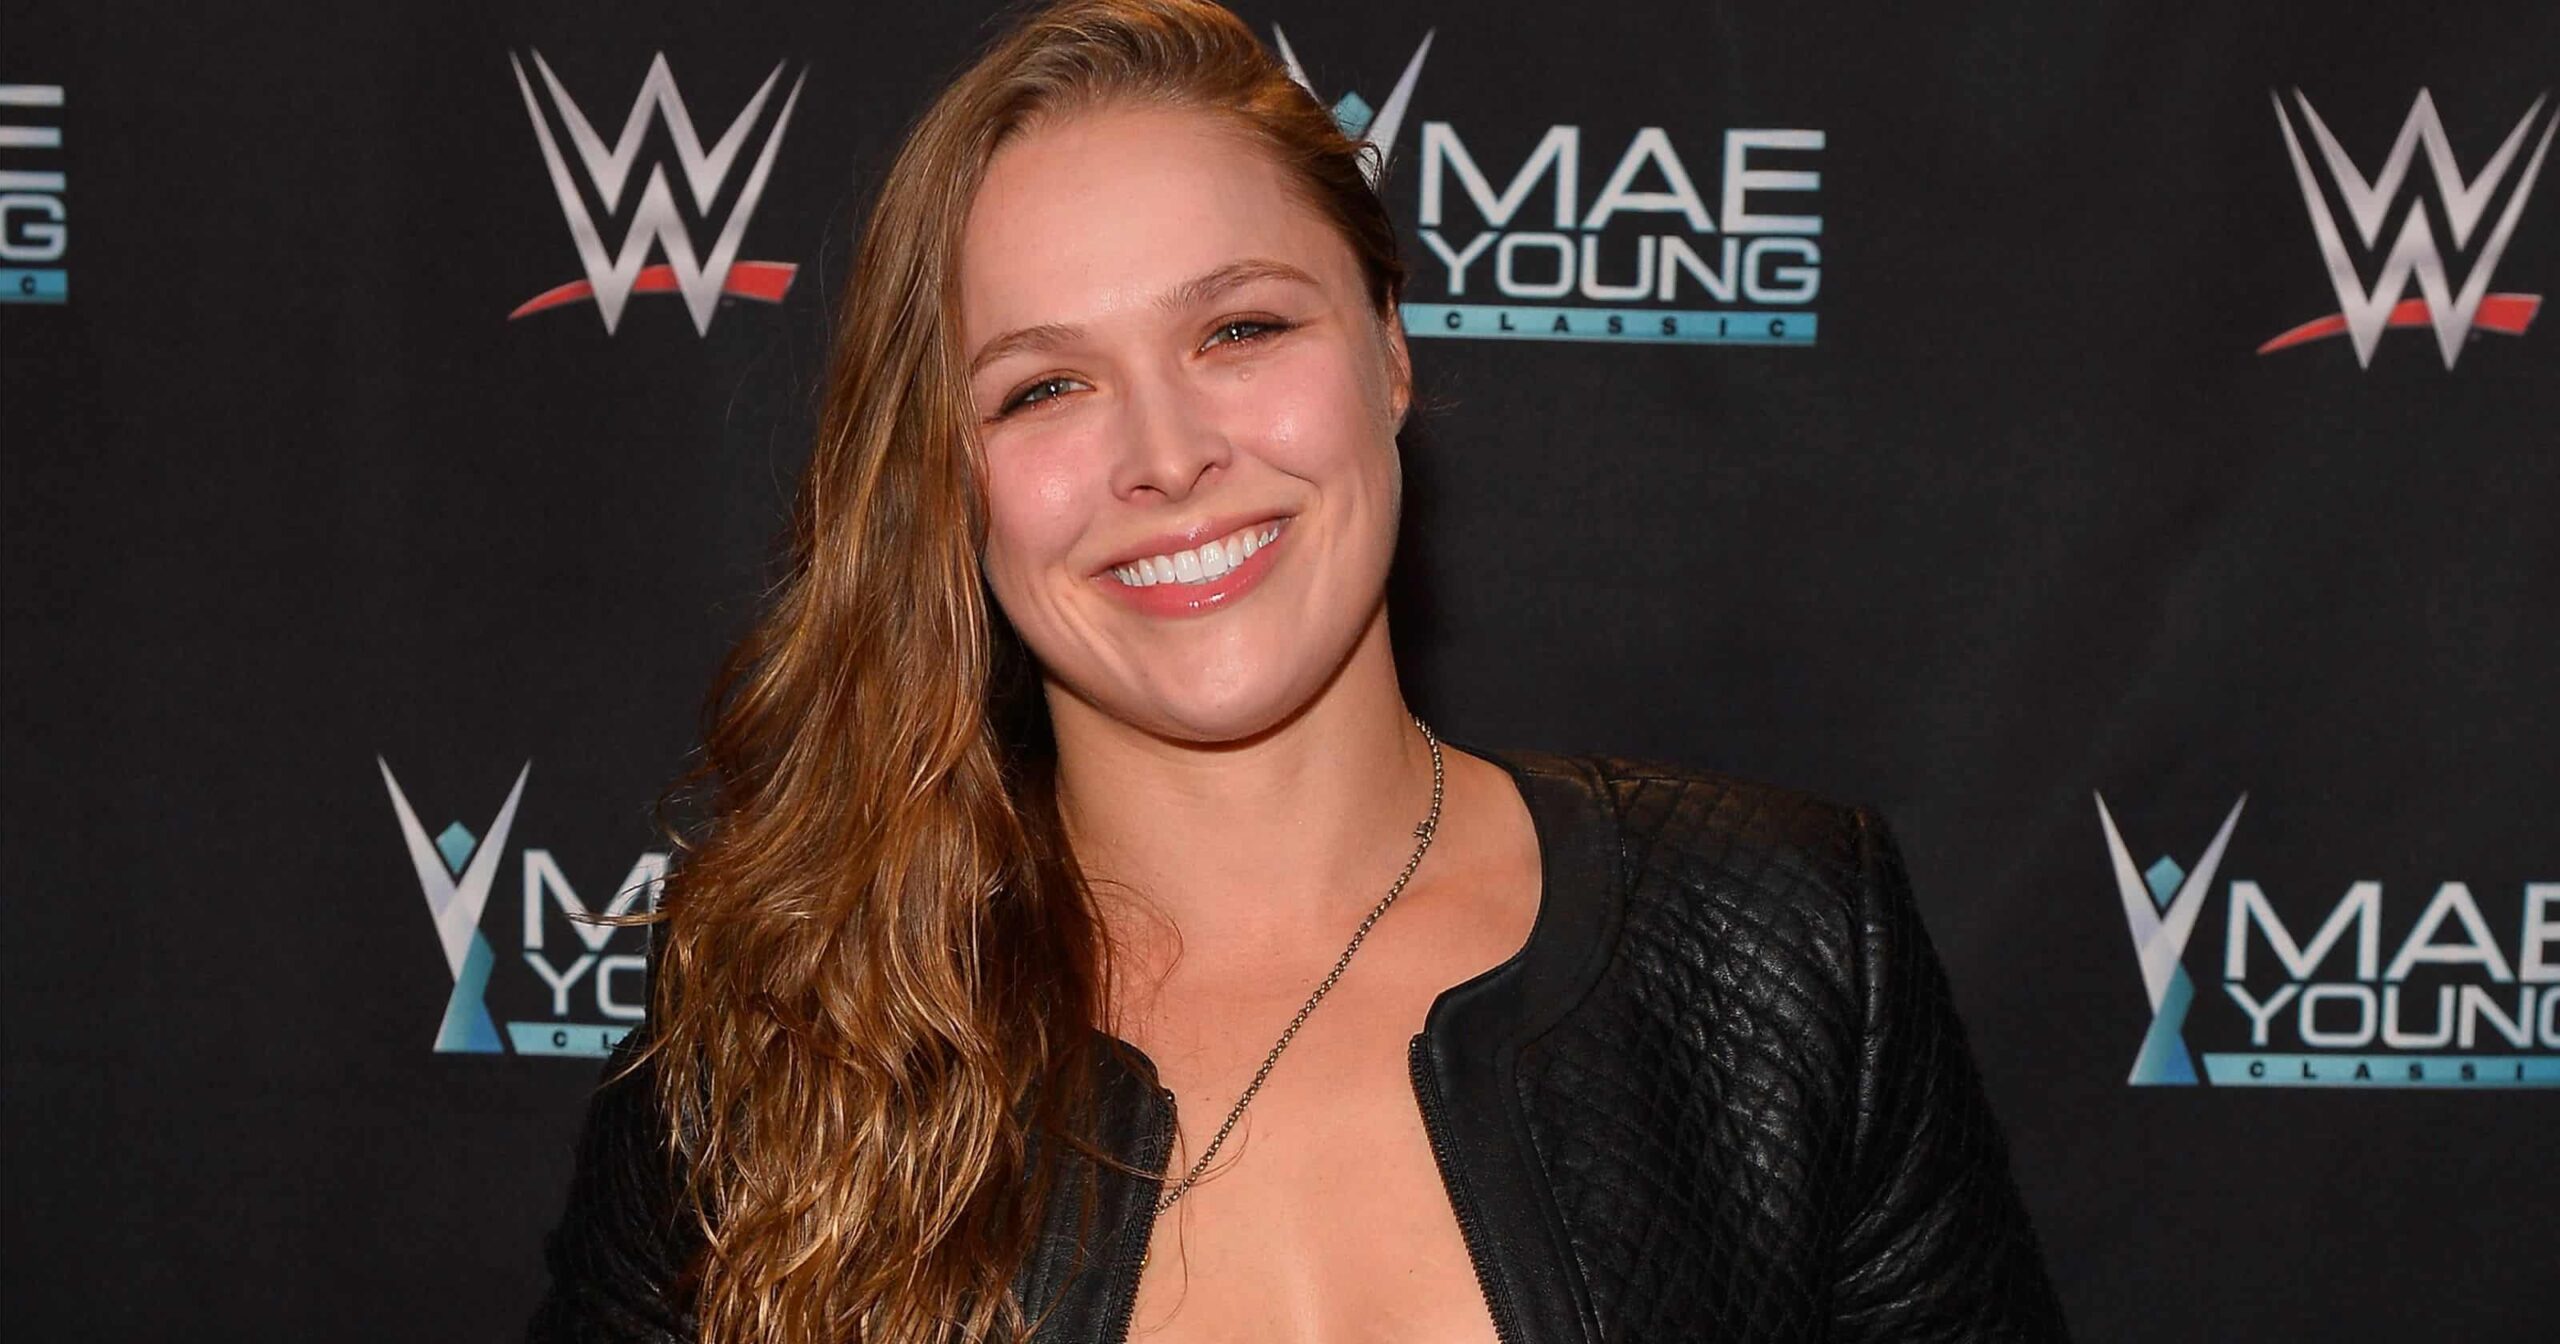 WWE eager to secure Ronda Rousey after UFC retirement 